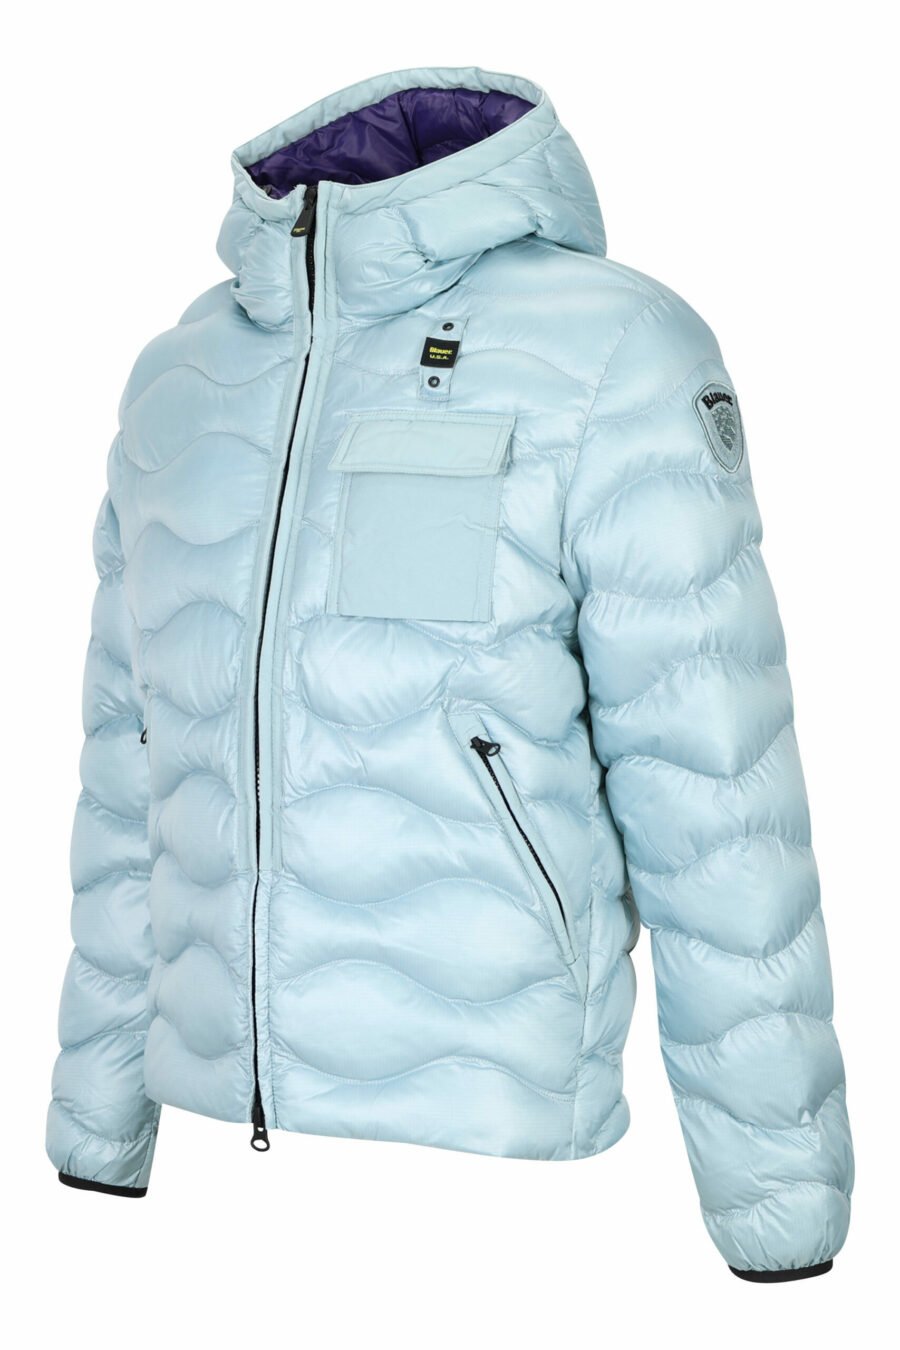 Light blue hooded jacket with wavy lines and violet lining - 8058610697198 2 scaled